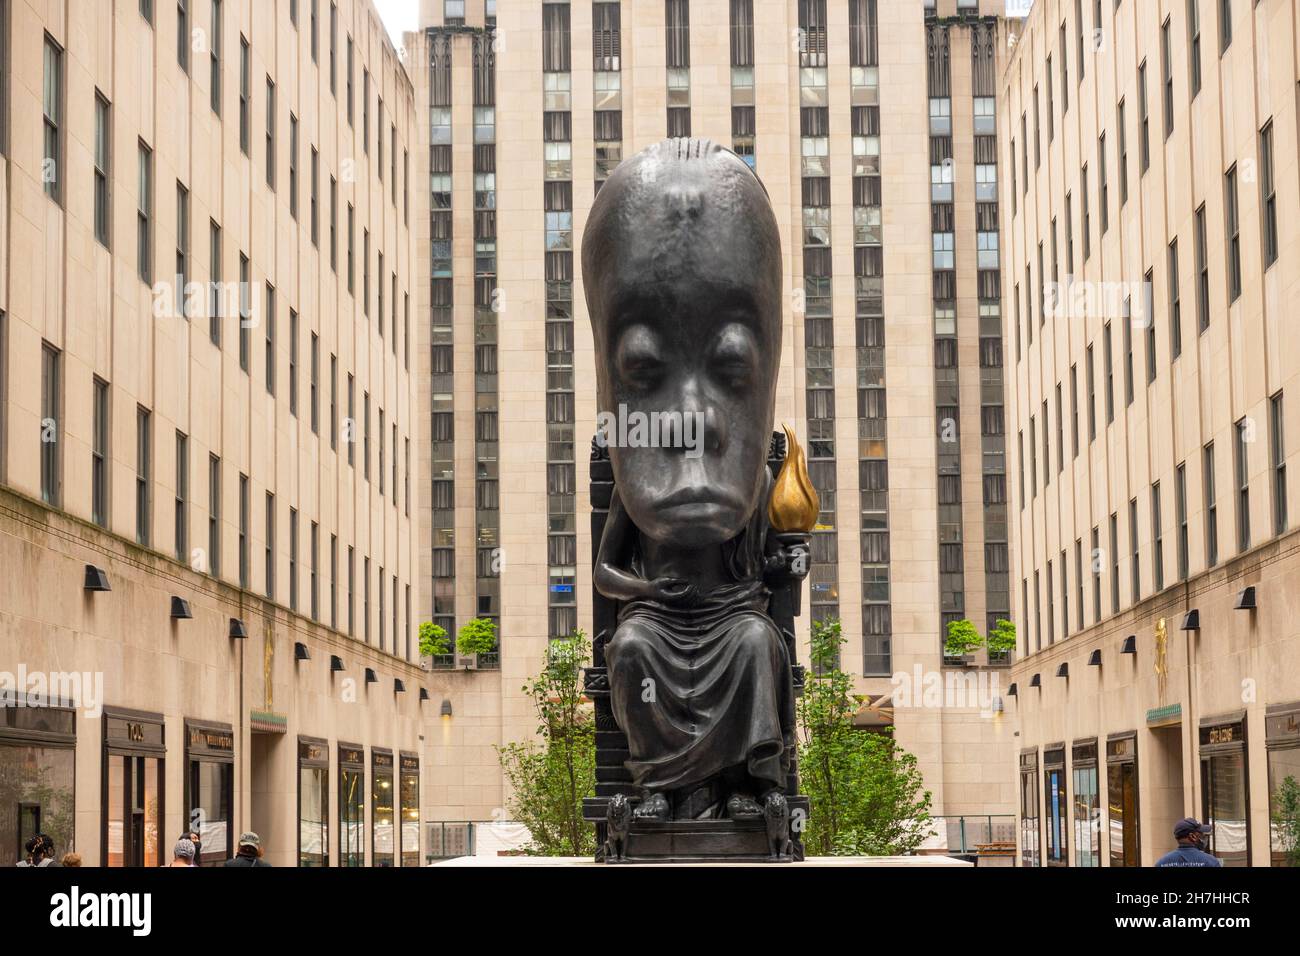 Oracle sculpture by Sanford Biggers in Rockefeller center plaza Manhattan NYC Stock Photo